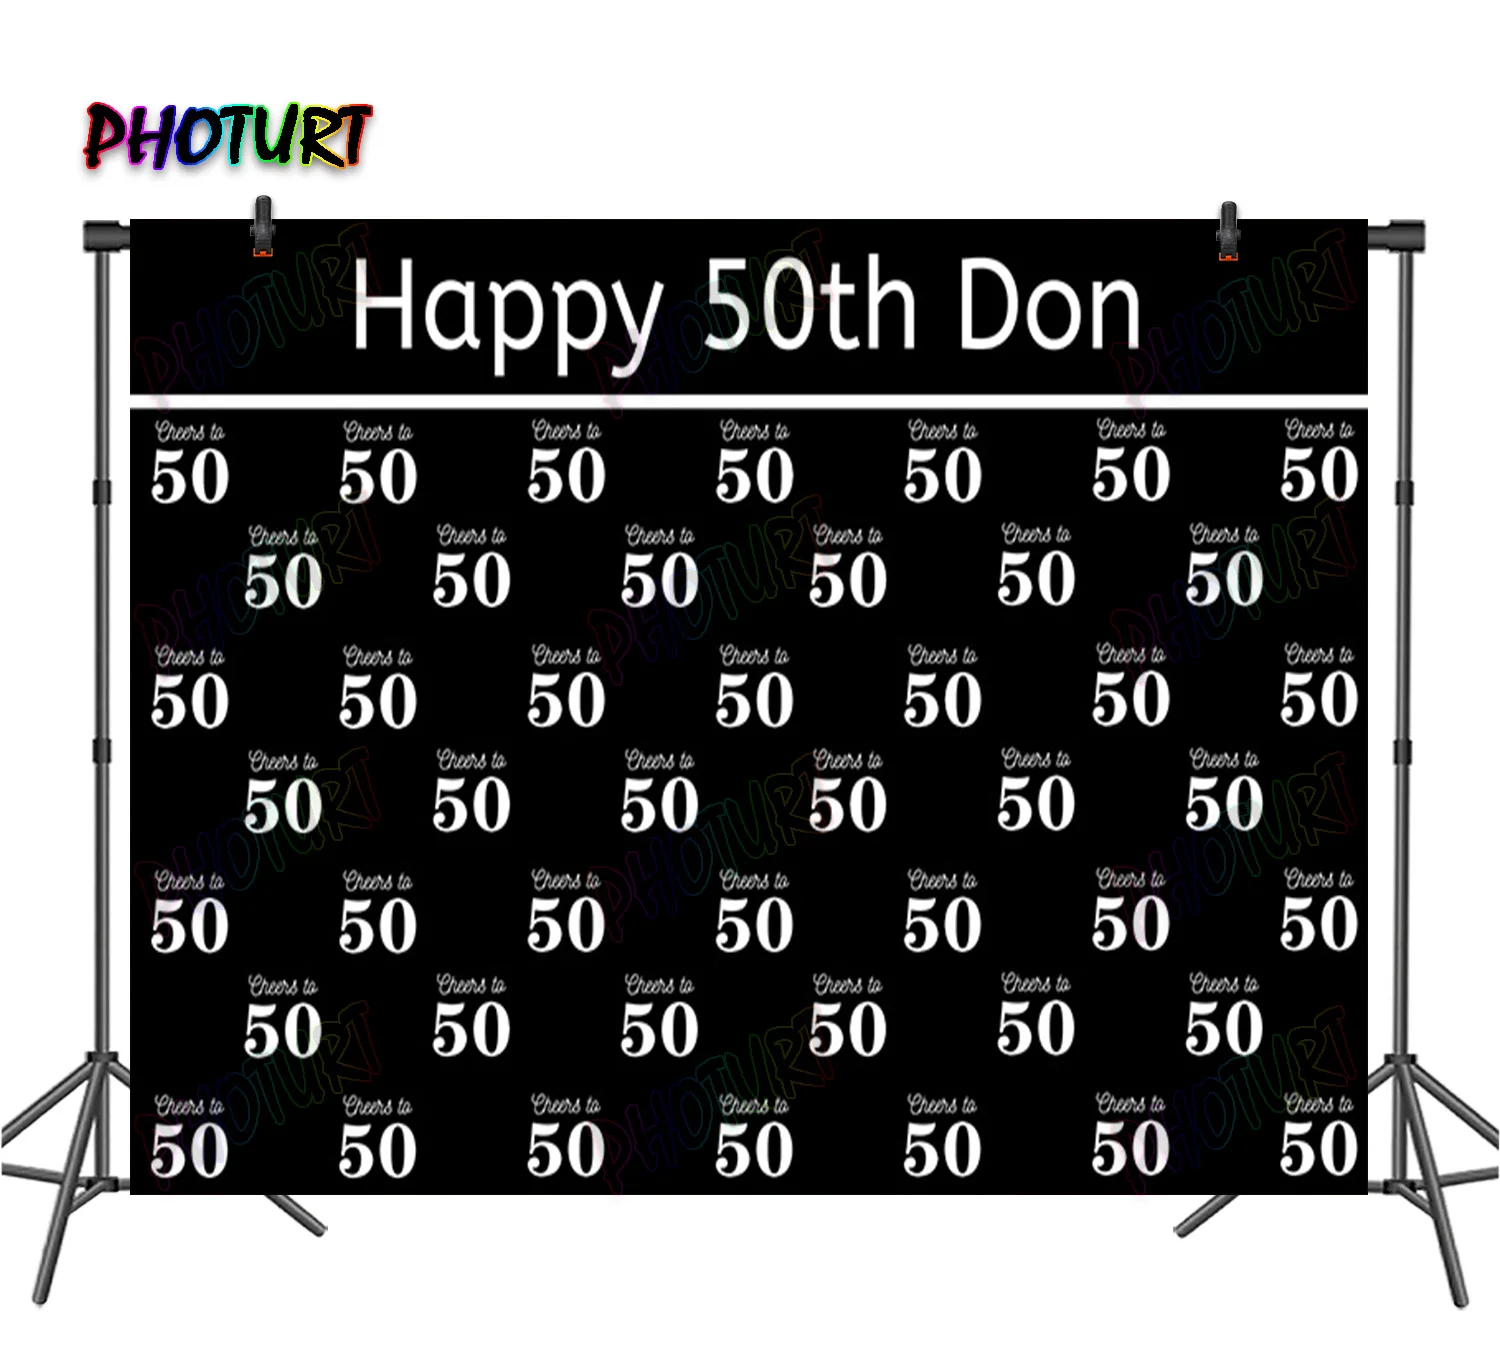 

PHOTURT Happy 50th Birthday Backdrop Age Custom Banner Party Decoration Background Black Repeat Polyester Vinyl Decor Props